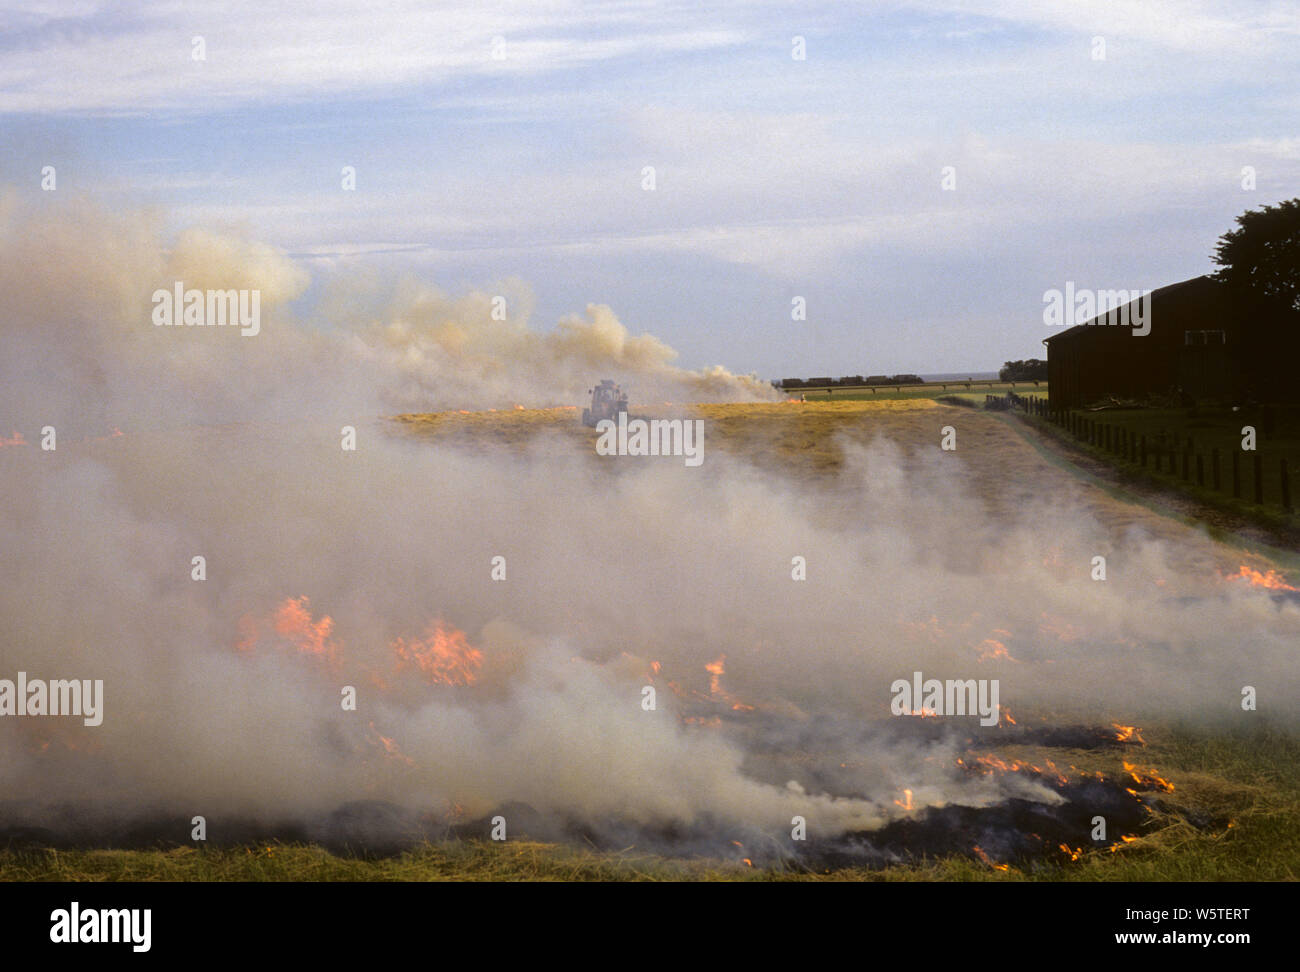 BURN BEATING on field after harvest Stock Photo